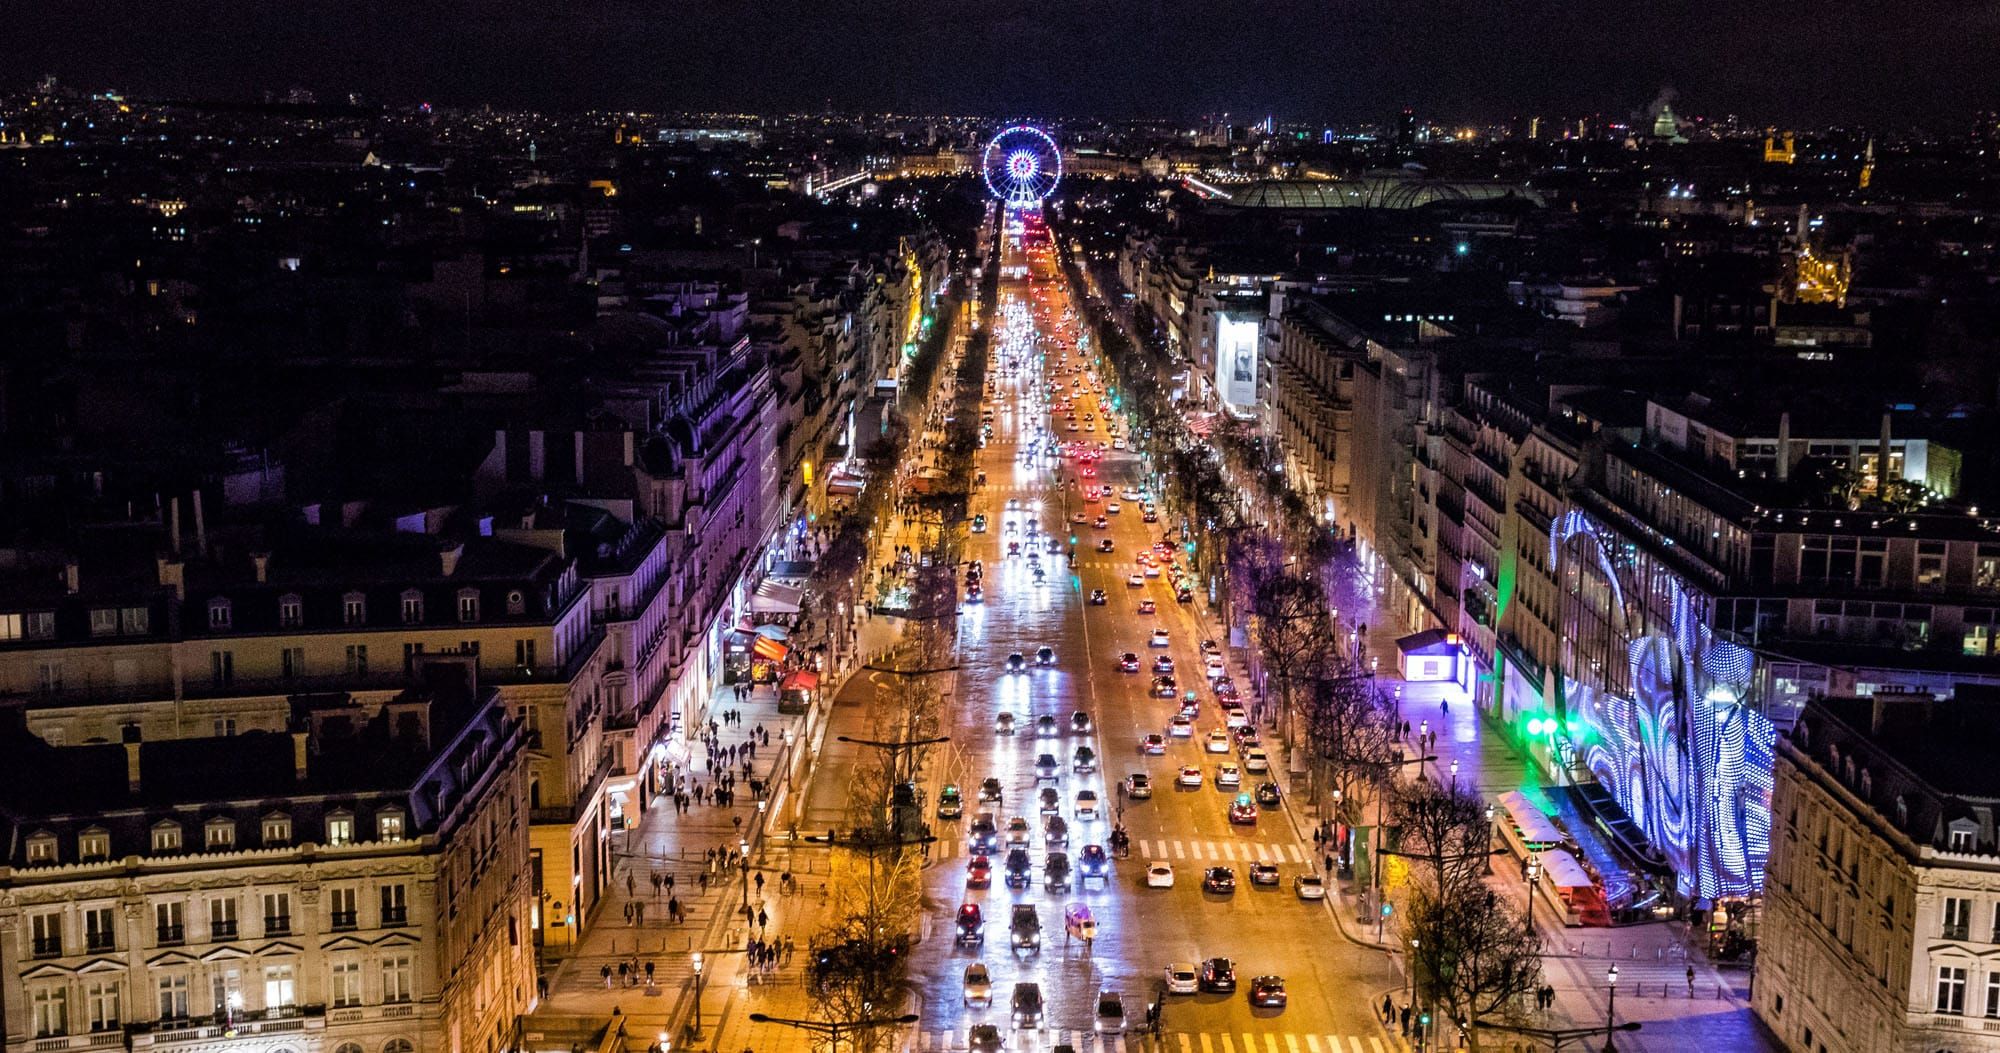 Looking down the Champs-Elysees at night from the top of the Arc de Triomphe.